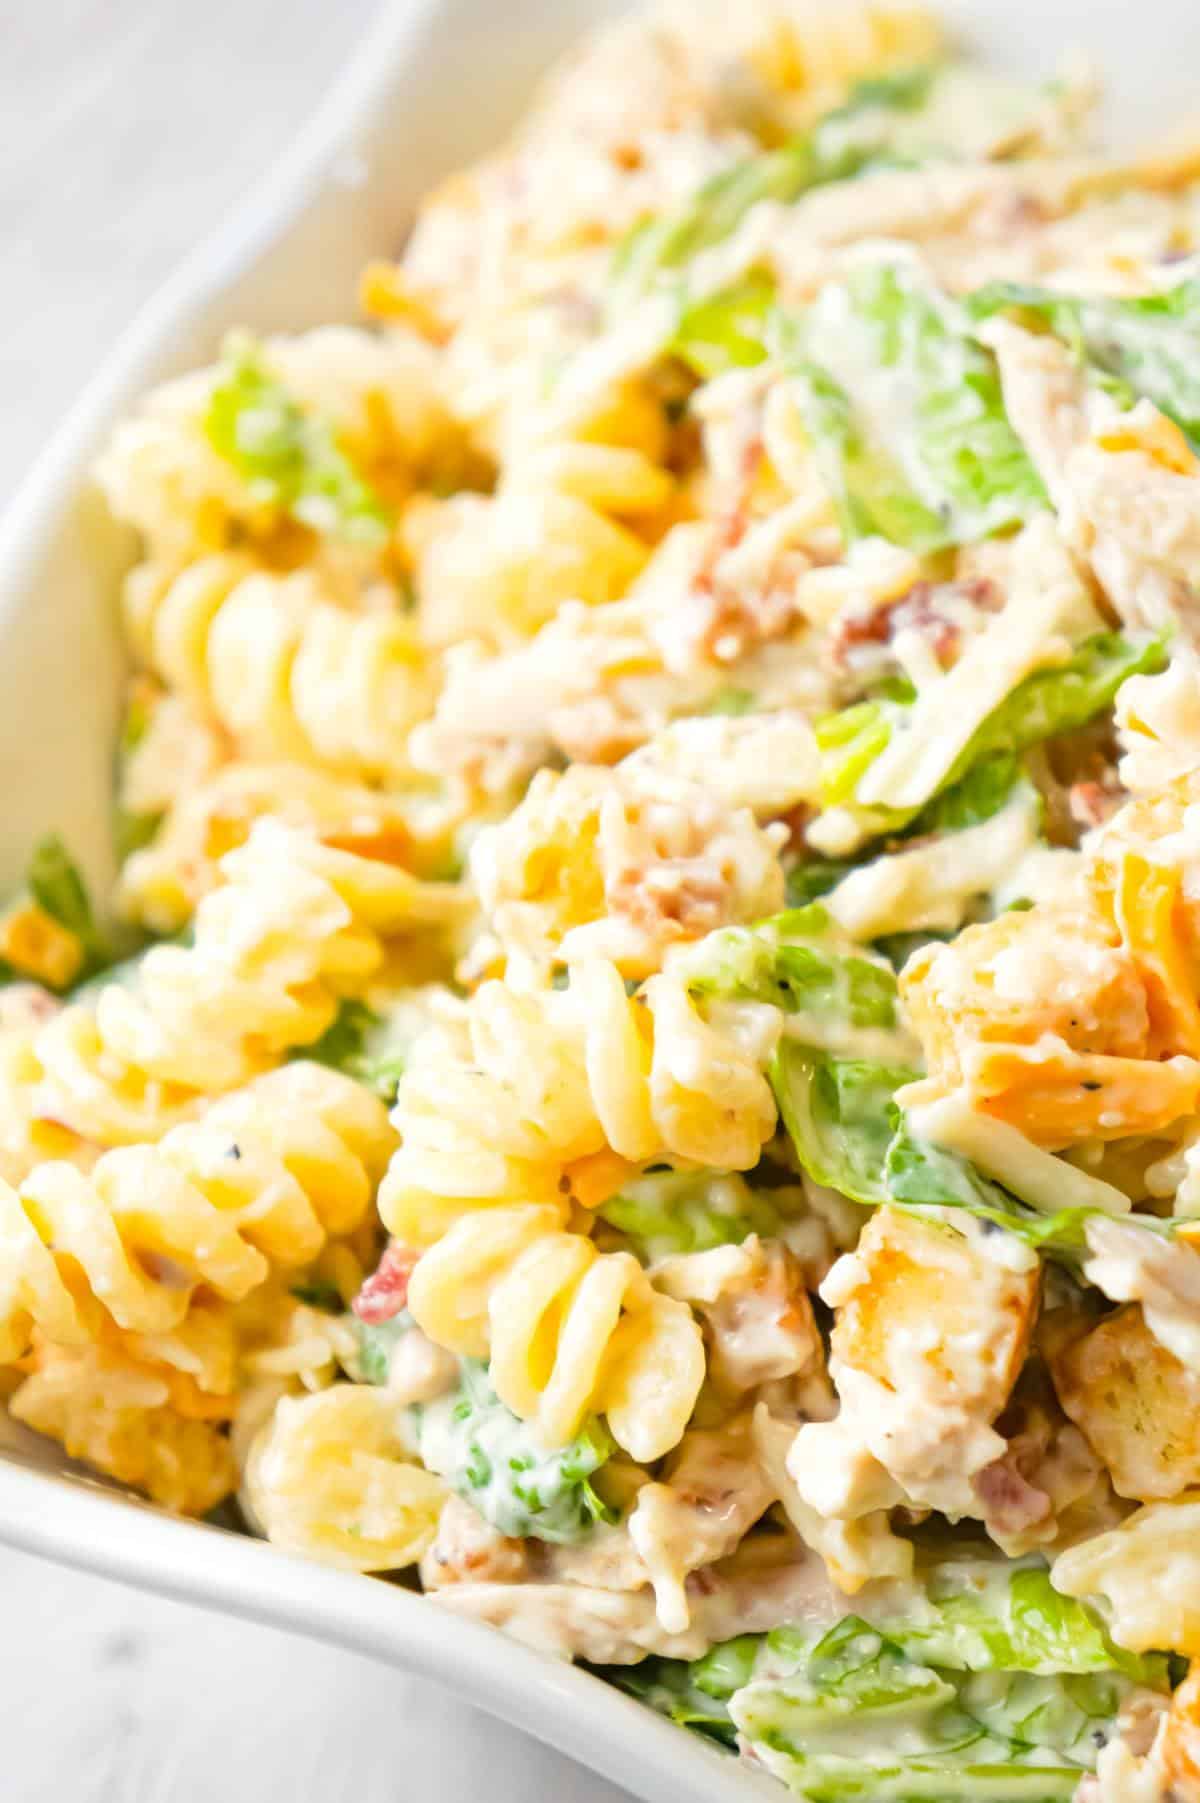 Chicken Caesar Pasta Salad is a tasty side cold dish recipe loaded with chopped romaine, shredded chicken, crumbled bacon, croutons, shredded mozzarella, cheddar and Parmesan cheese all tossed in a creamy garlic Parmesan dressing.